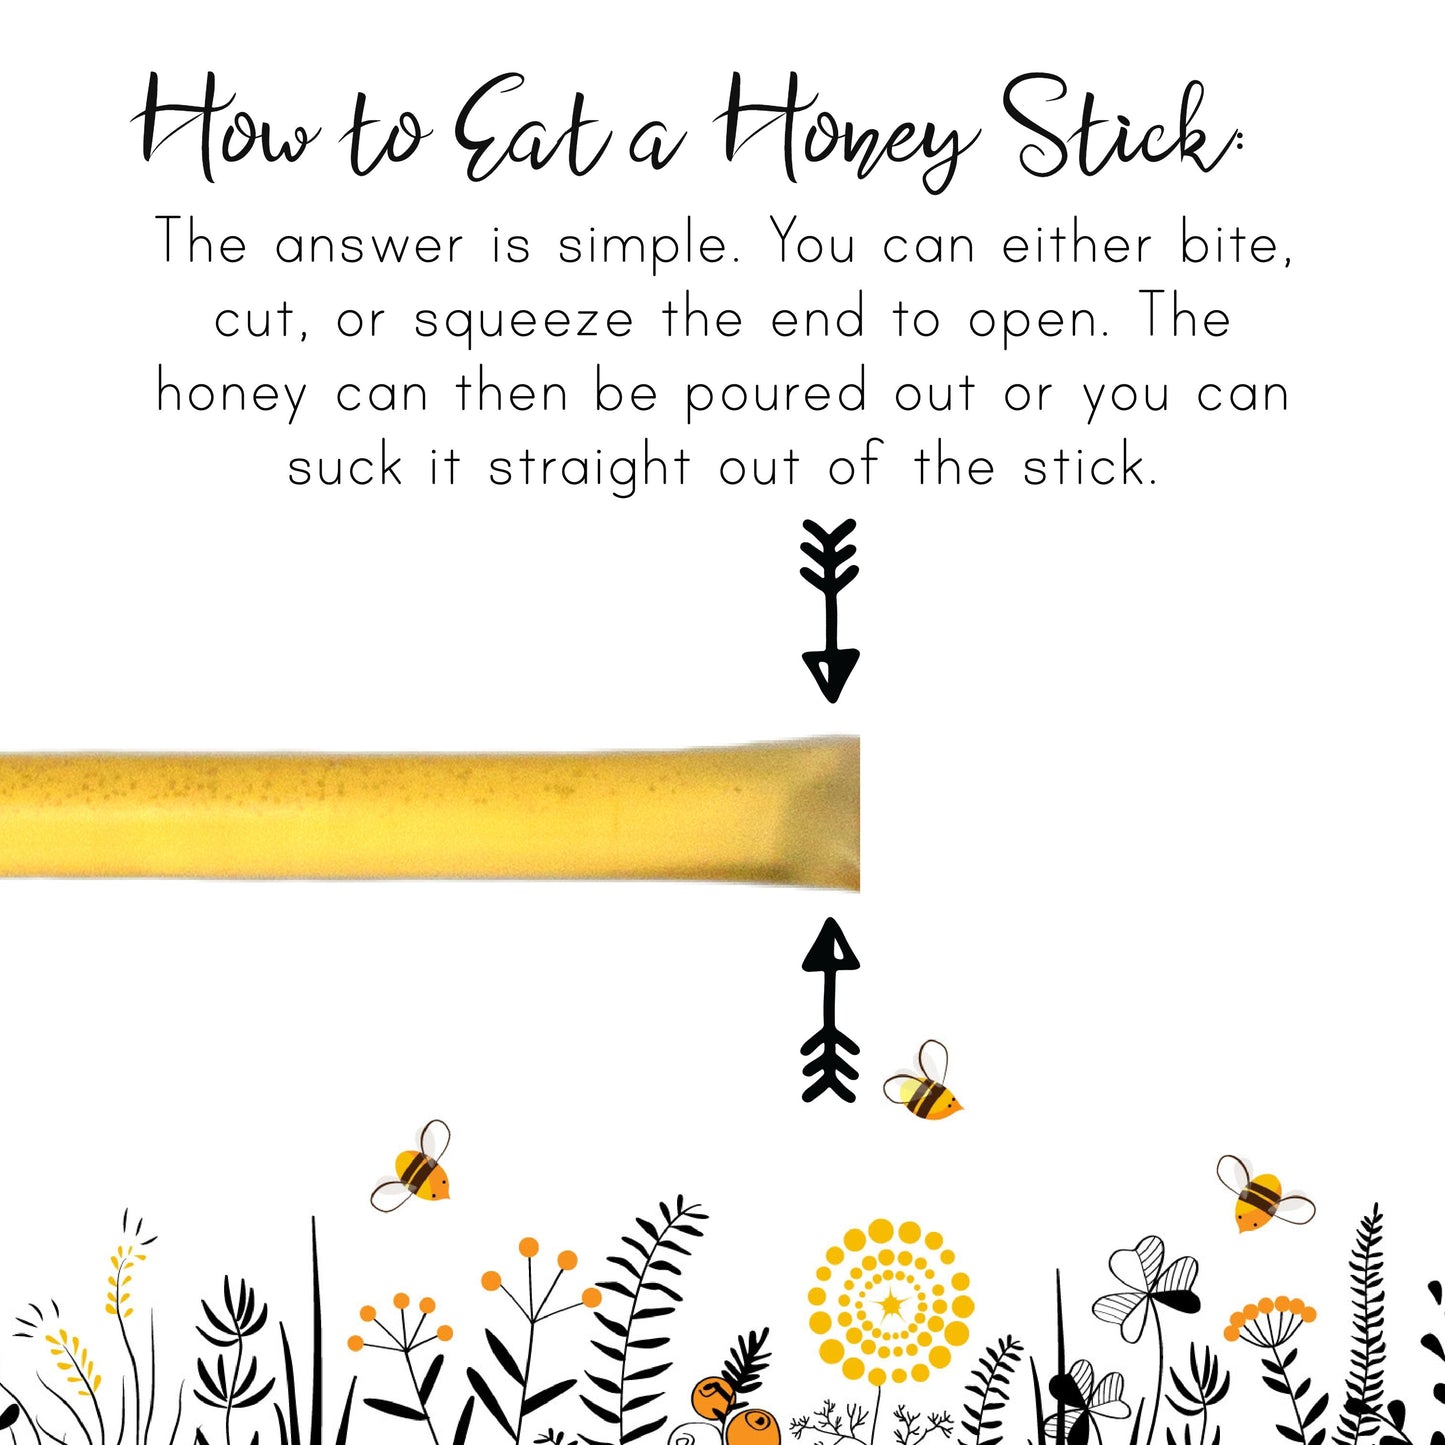 Pure Northern Michigan Honey Sticks 3pk by Sister Bees